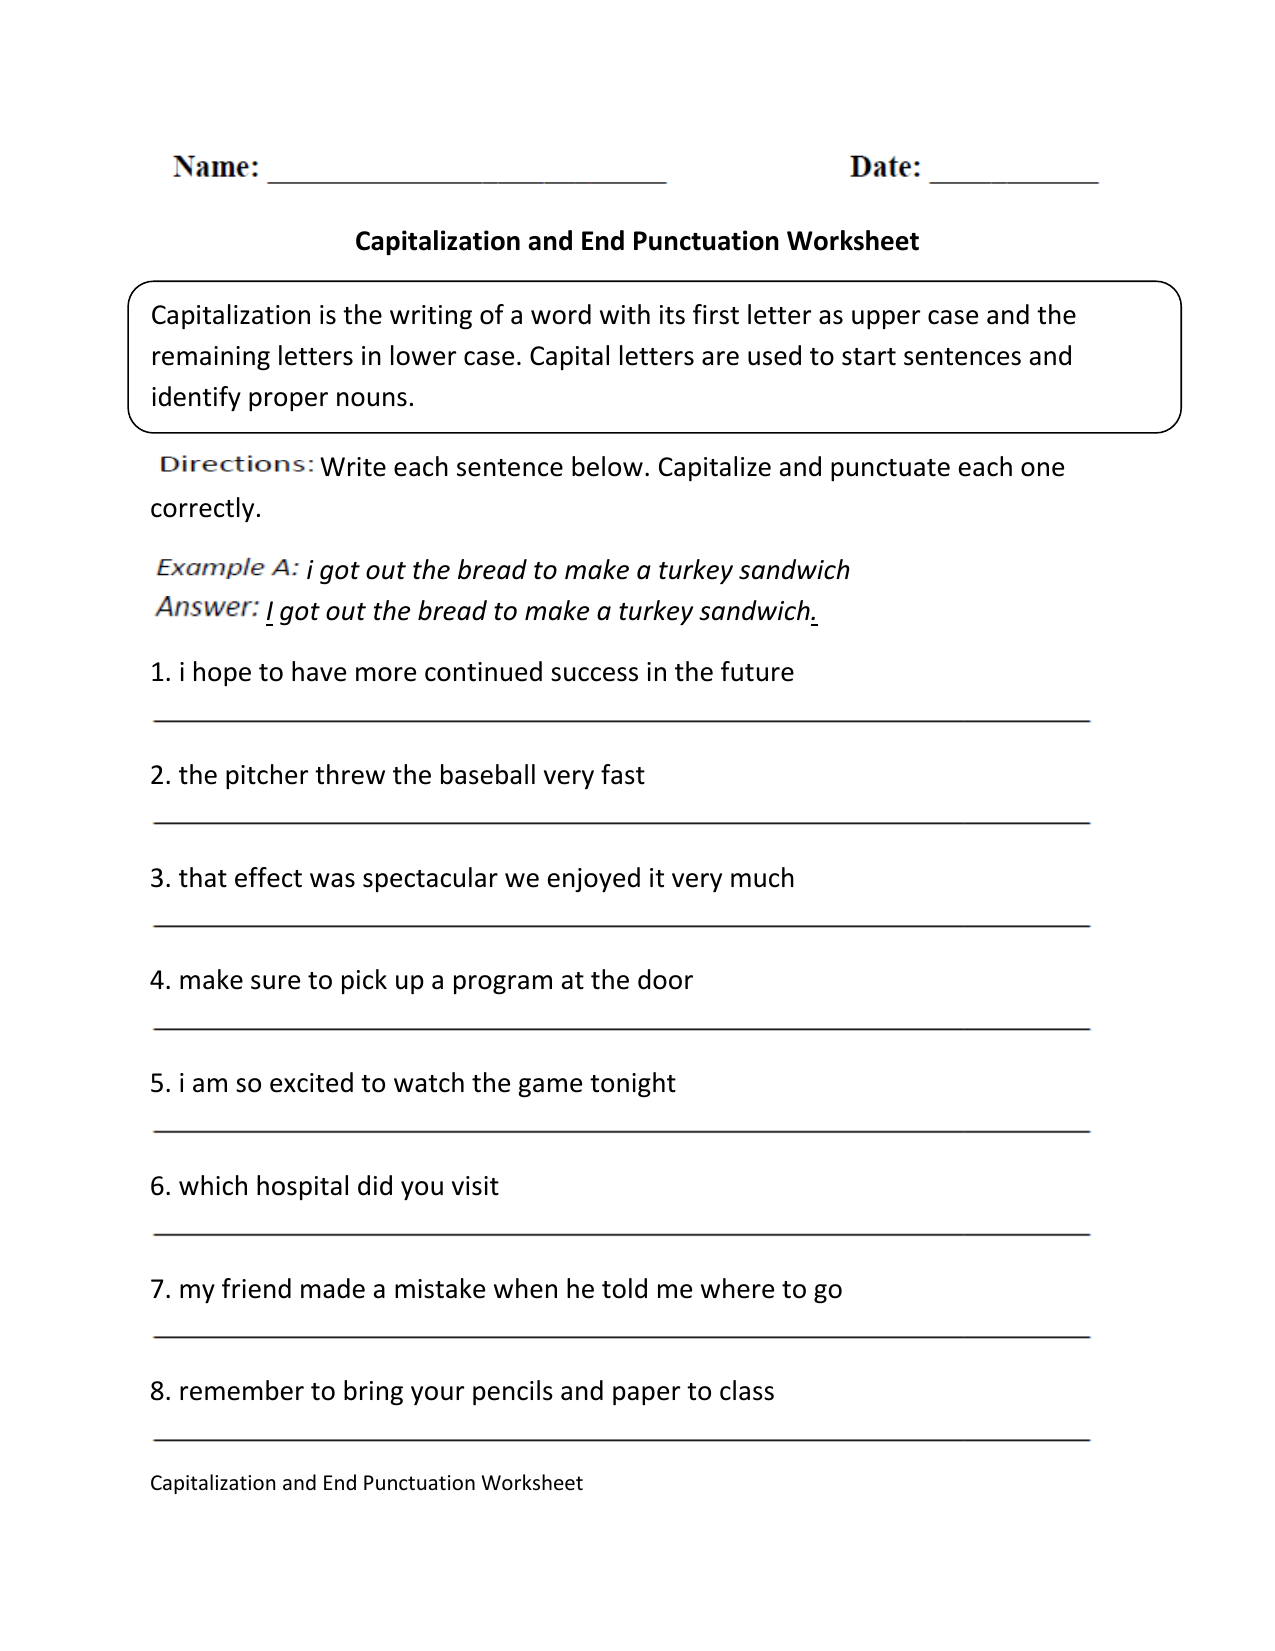 grade-4-punctuation-worksheets-k5-learning-punctuation-exercise-for-class-4-louis-lowen